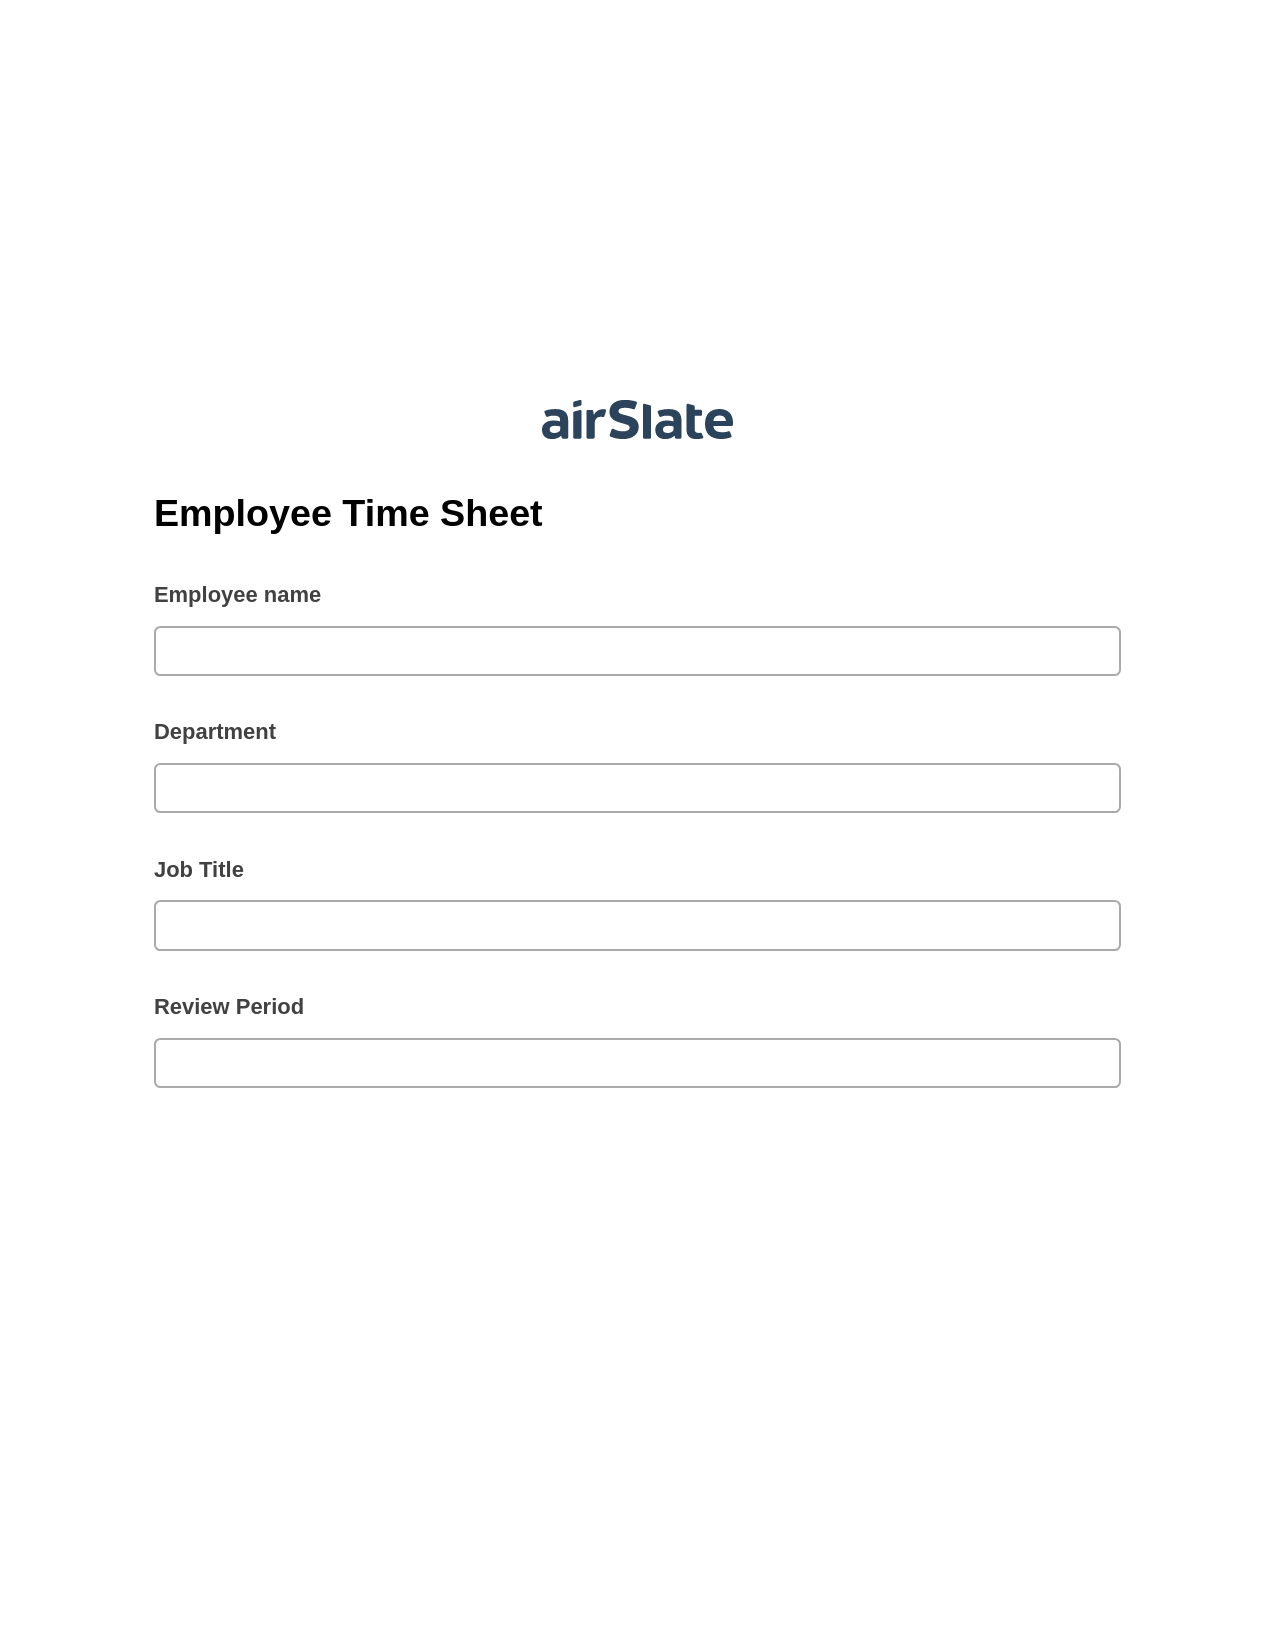 Multirole Employee Time Sheet Pre-fill from CSV File Bot, Send a Slate with Roles Bot, Export to NetSuite Bot